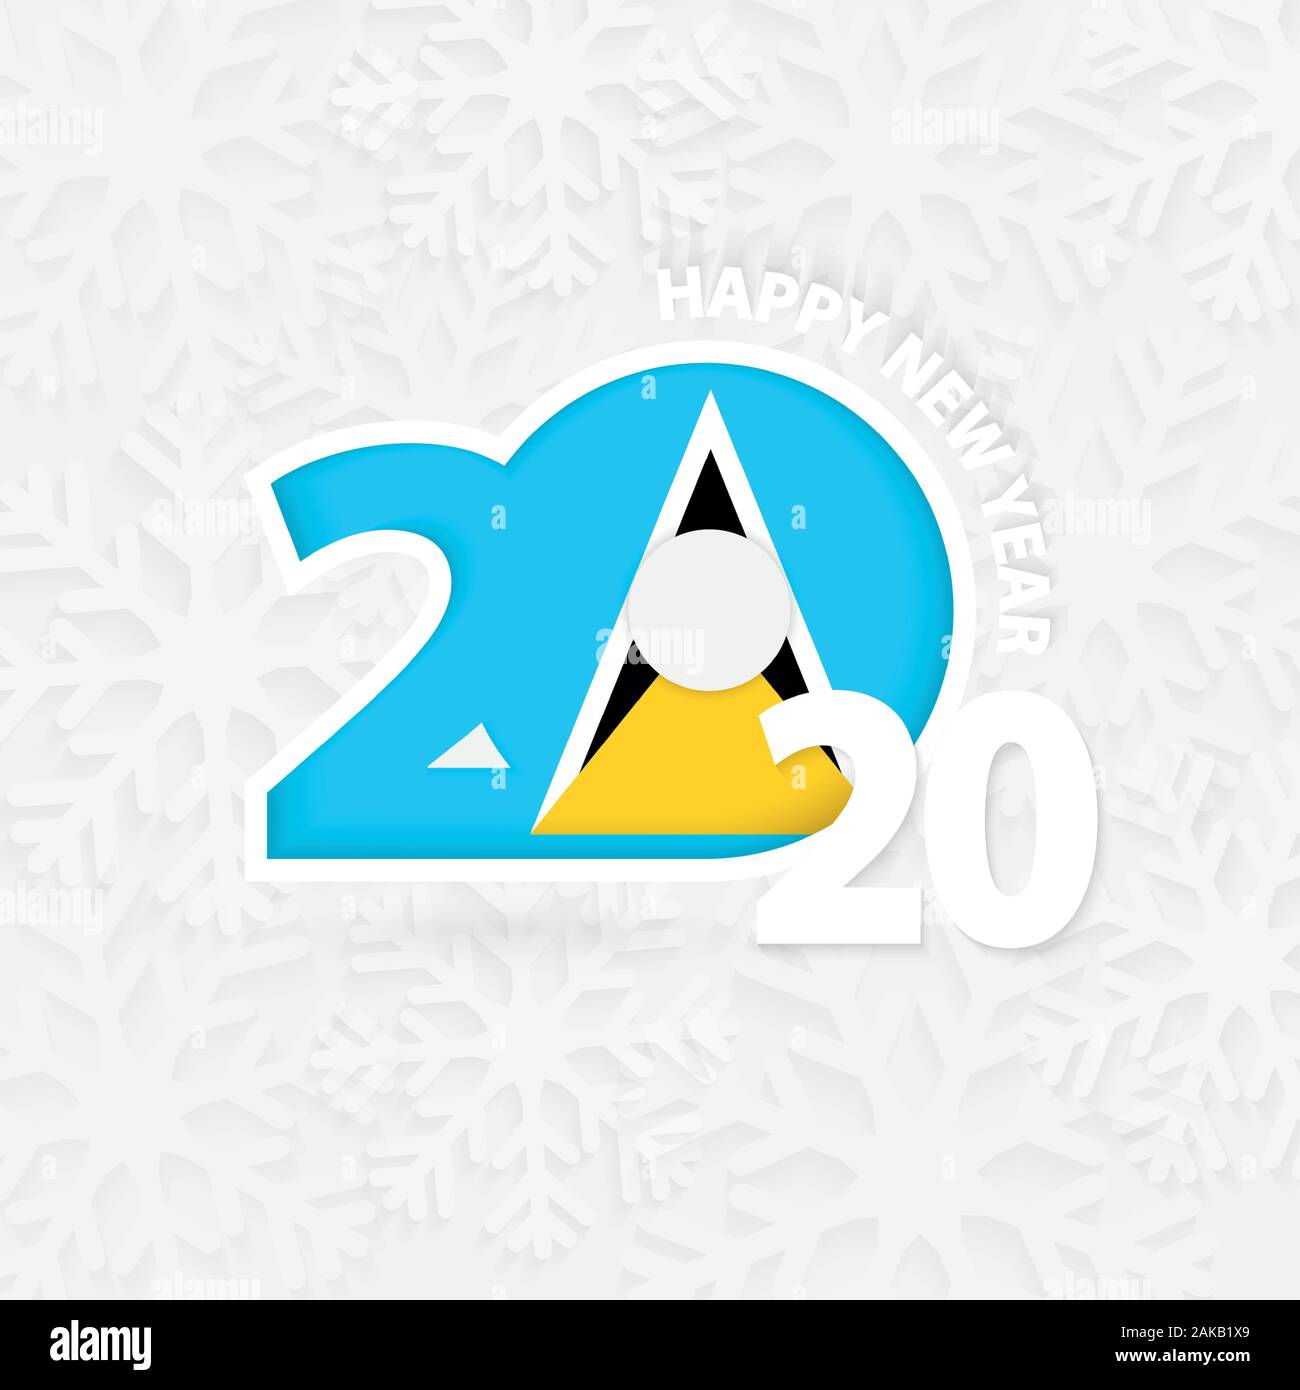 Happy New Year 2020 for Saint Lucia on snowflake background. Greeting Saint Lucia with new 2020 year. Stock Vector